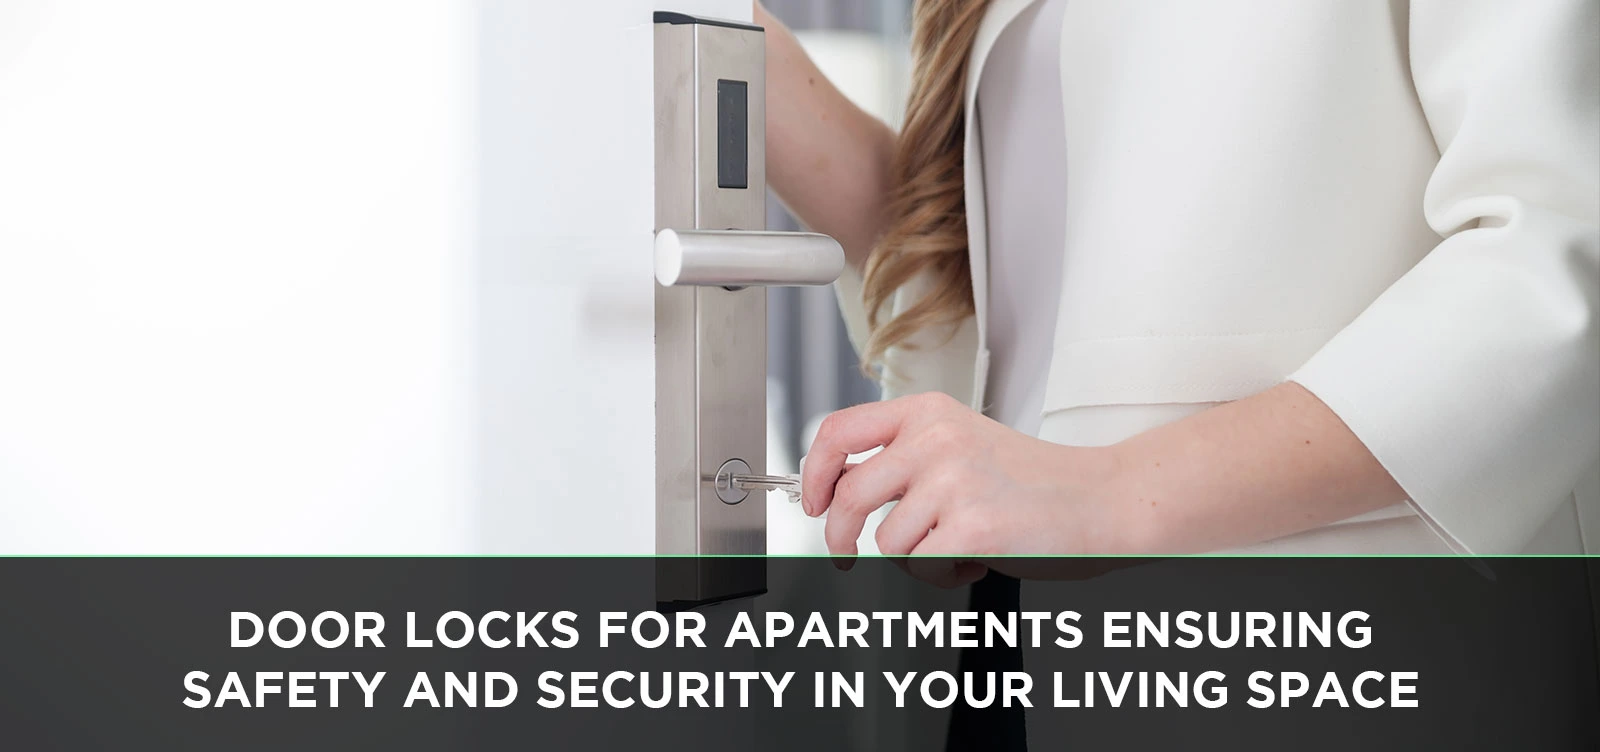 Door Locks for Apartments Ensuring Safety and Security in Your Living Space